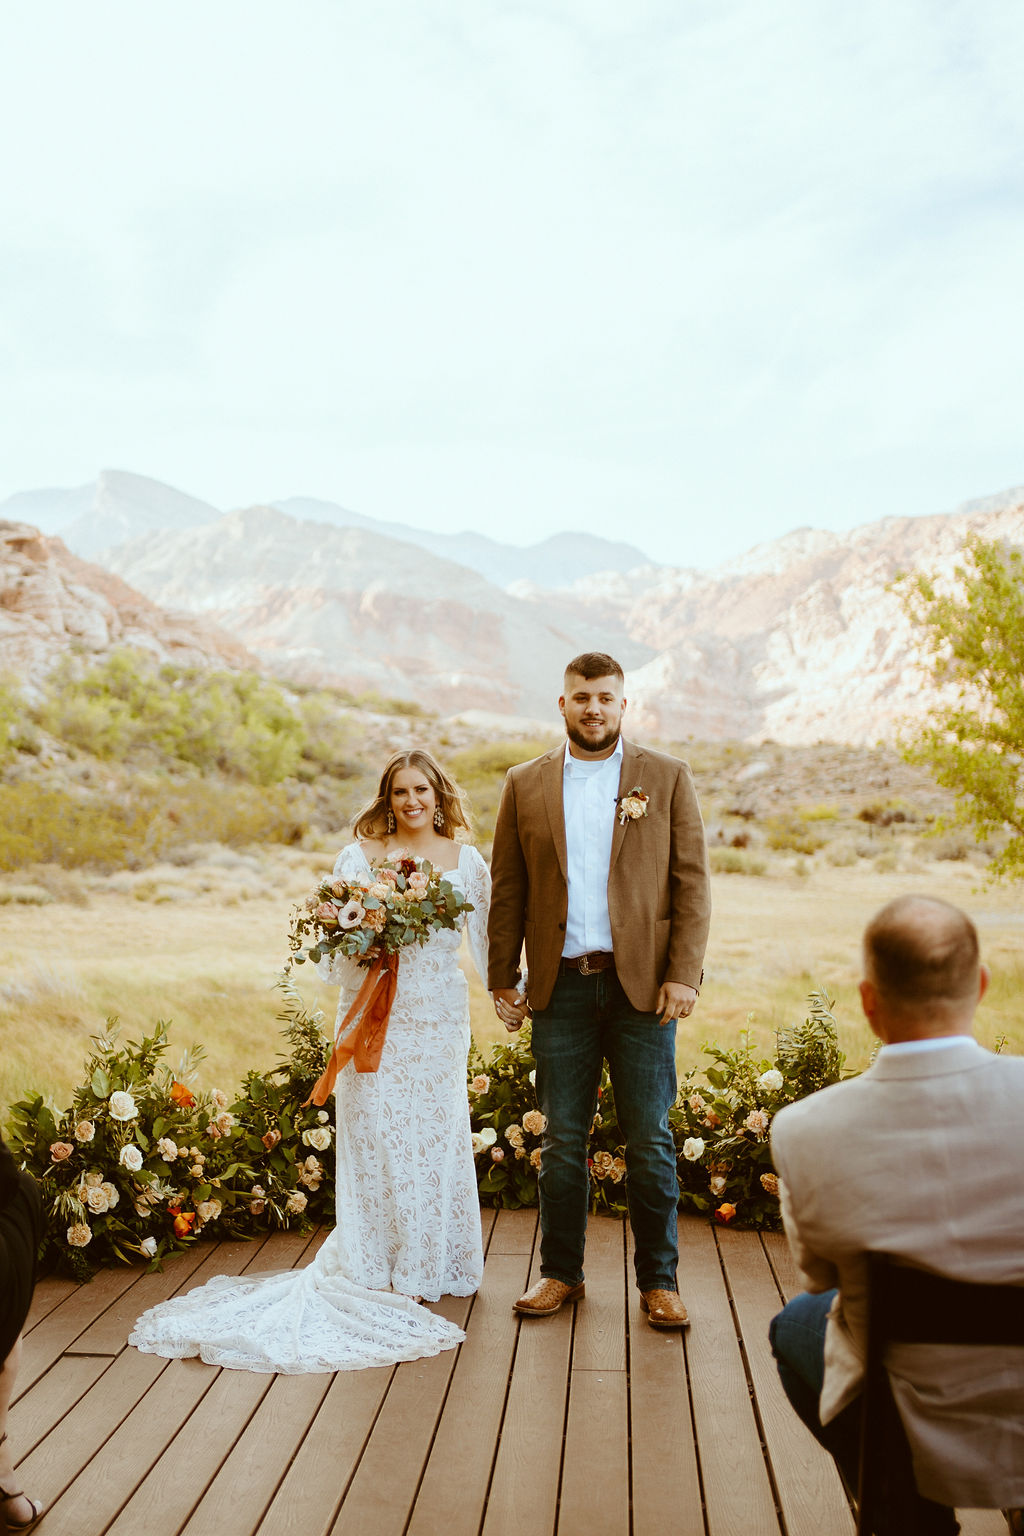 Rustic Boho Never Looked So Good! Hand in hand the bride and groom smile at their friend and family. The bride holds her rustic boho bridal bouquet with burnt orange lace wrapped around the stems. Their rustic floral ground arch behind them. 